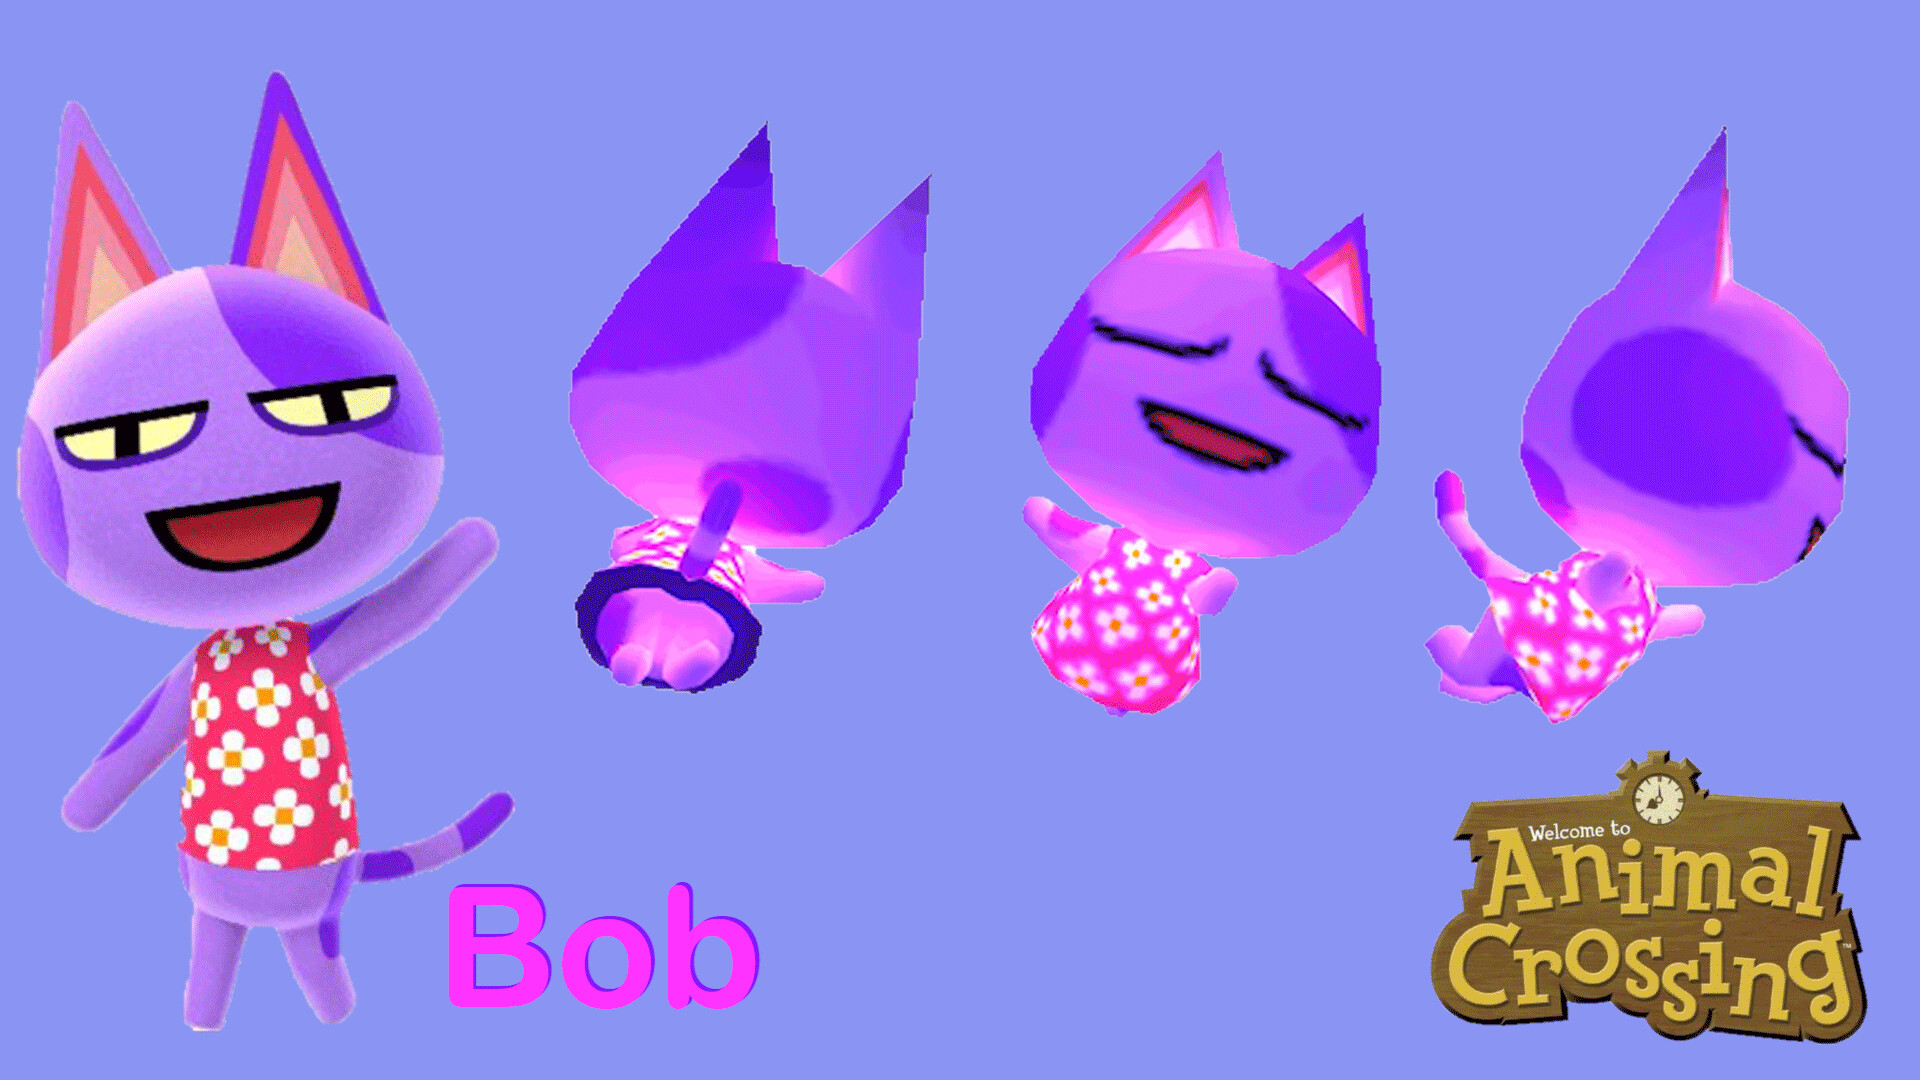 Bob (Animal Crossing Character) without and with Keychain